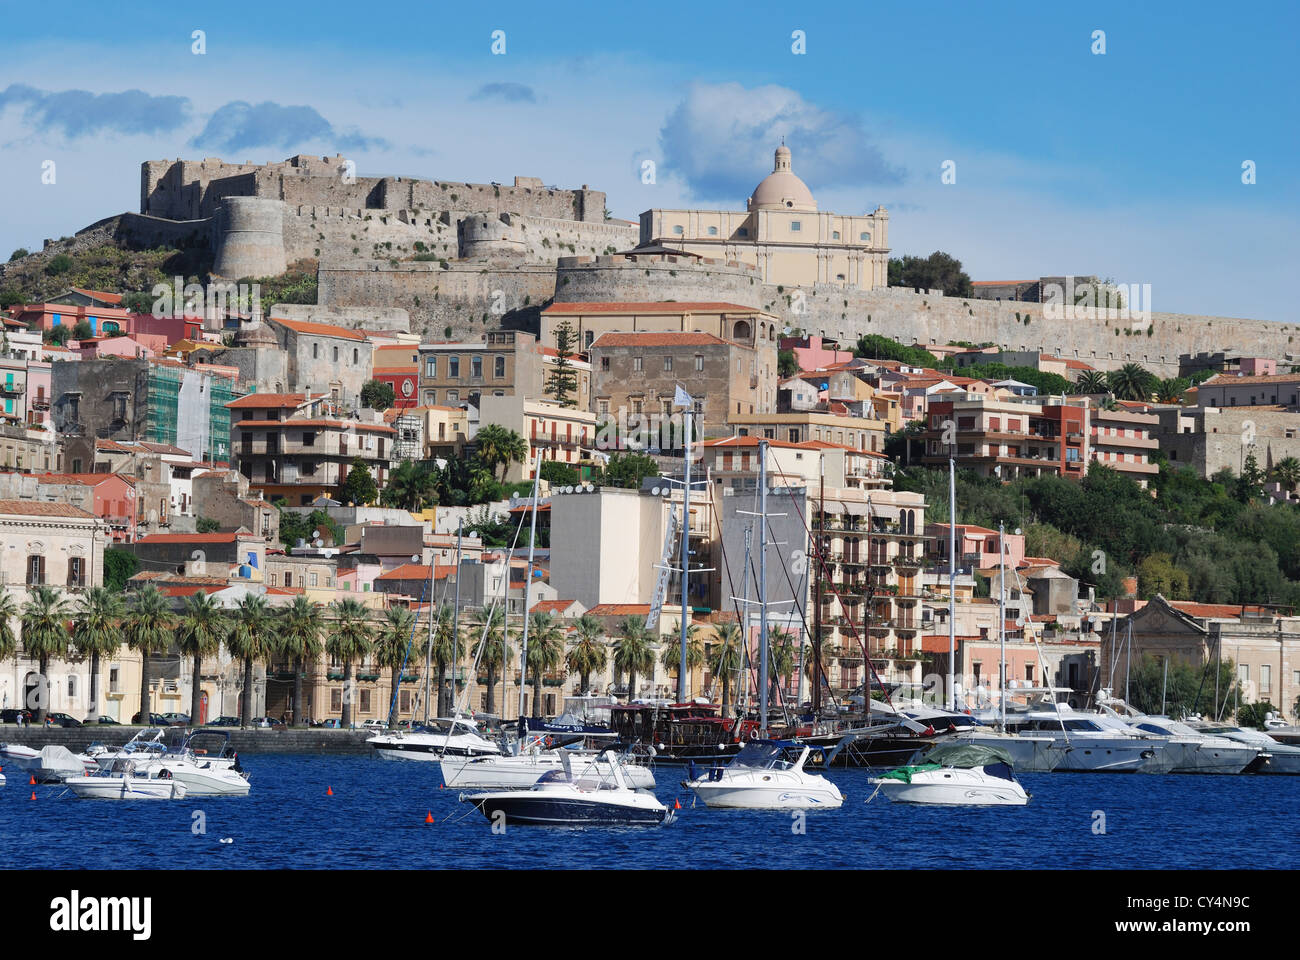 The town of Milazzo, Sicily, Italy. Stock Photo